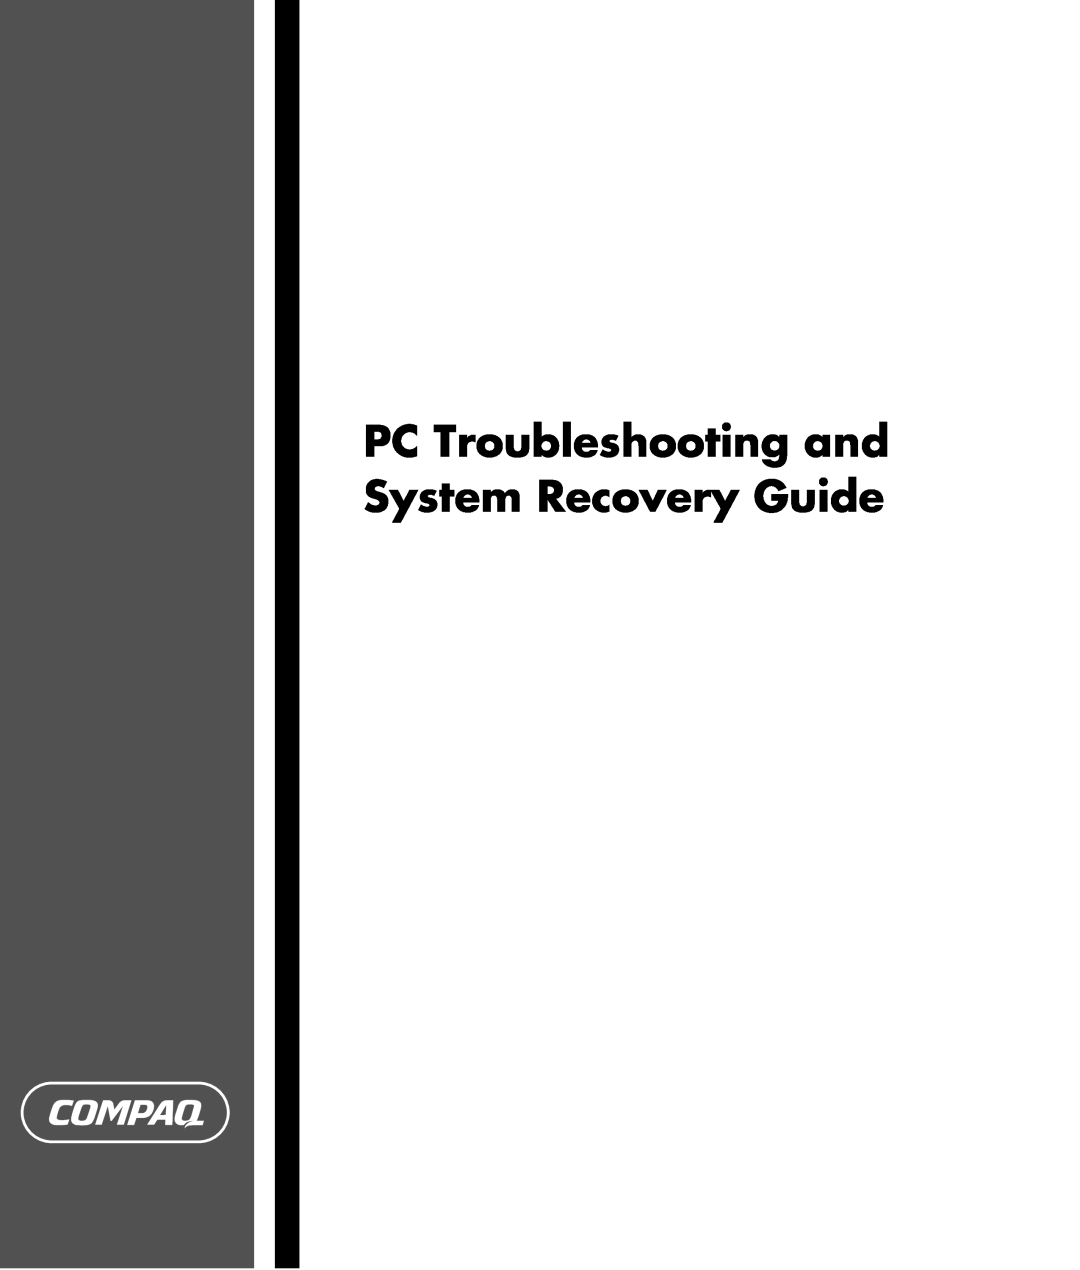 HP SR1519X, SR1520NX, SR1520AN, SR1517CL, SR1514NX, SR1510NX, SR1511NX manual PC Troubleshooting and System Recovery Guide 